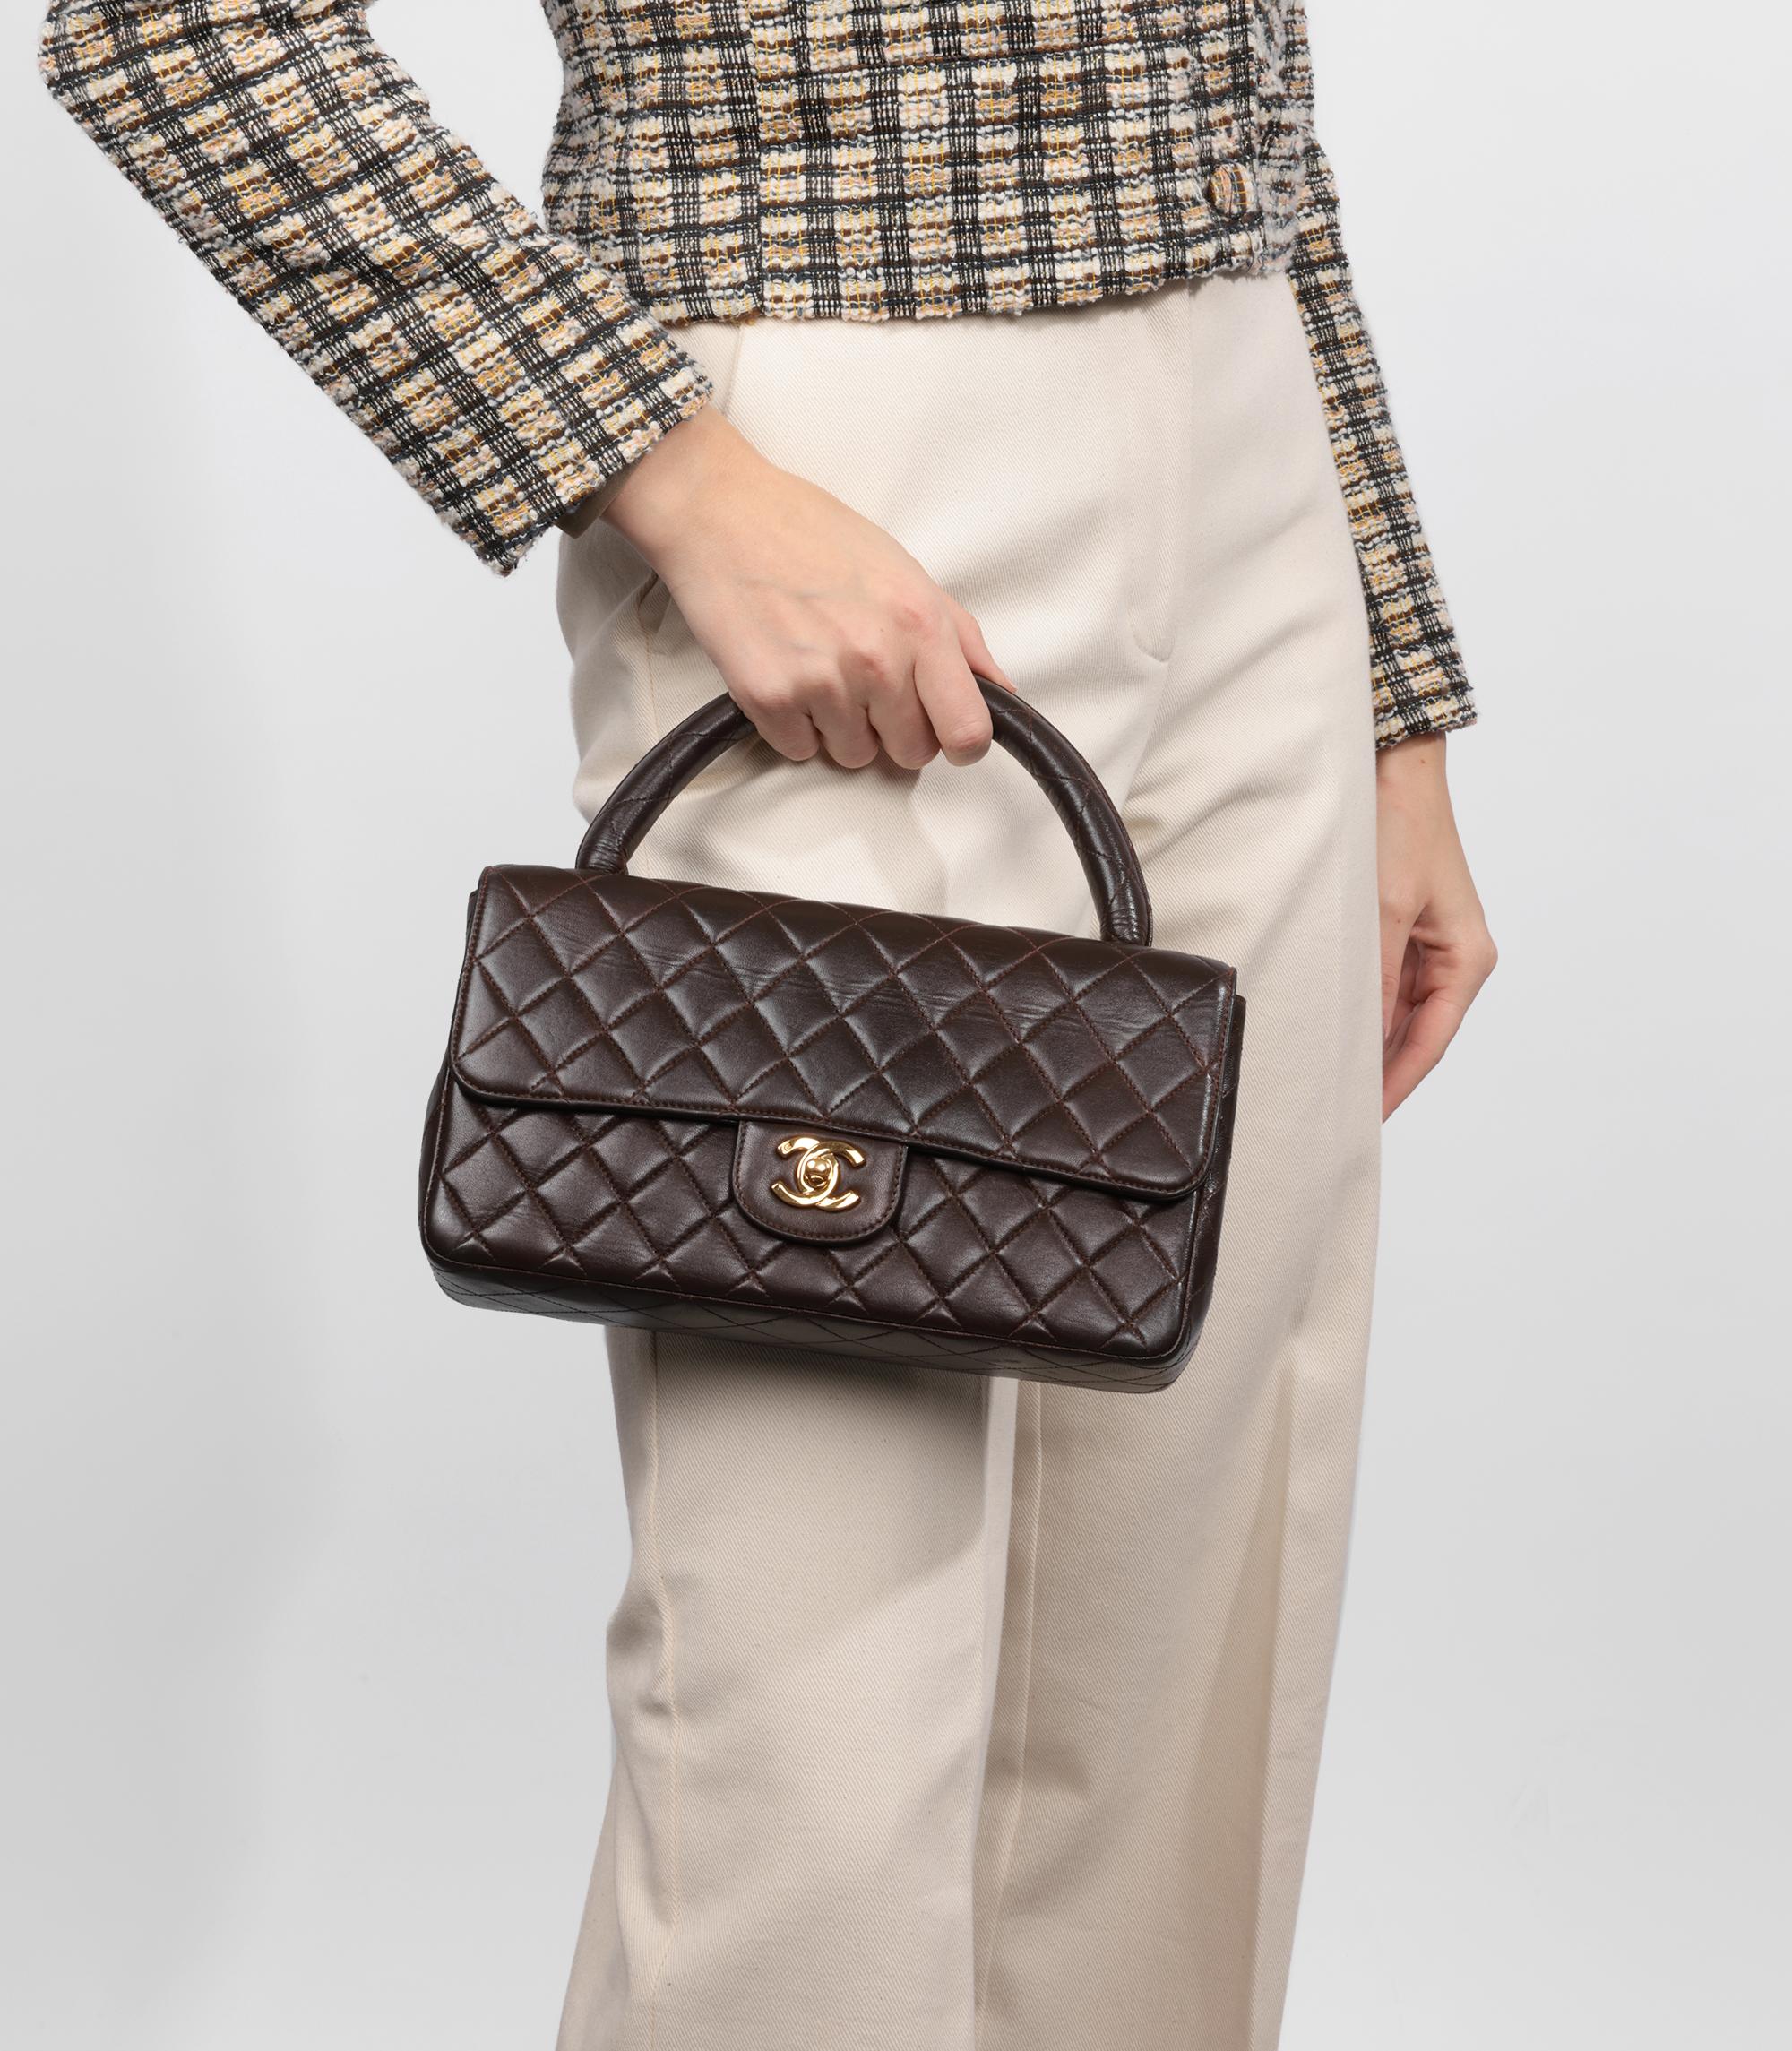 Chanel Brown Quilted Lambskin Vintage Medium Classic Kelly

Brand- Chanel
Model- Medium Classic Kelly
Product Type- Top Handle
Serial Number- 29*****
Age- Circa 1991
Accompanied By- Chanel Dust Bag, Authenticity Card
Colour- Brown
Hardware- Gold